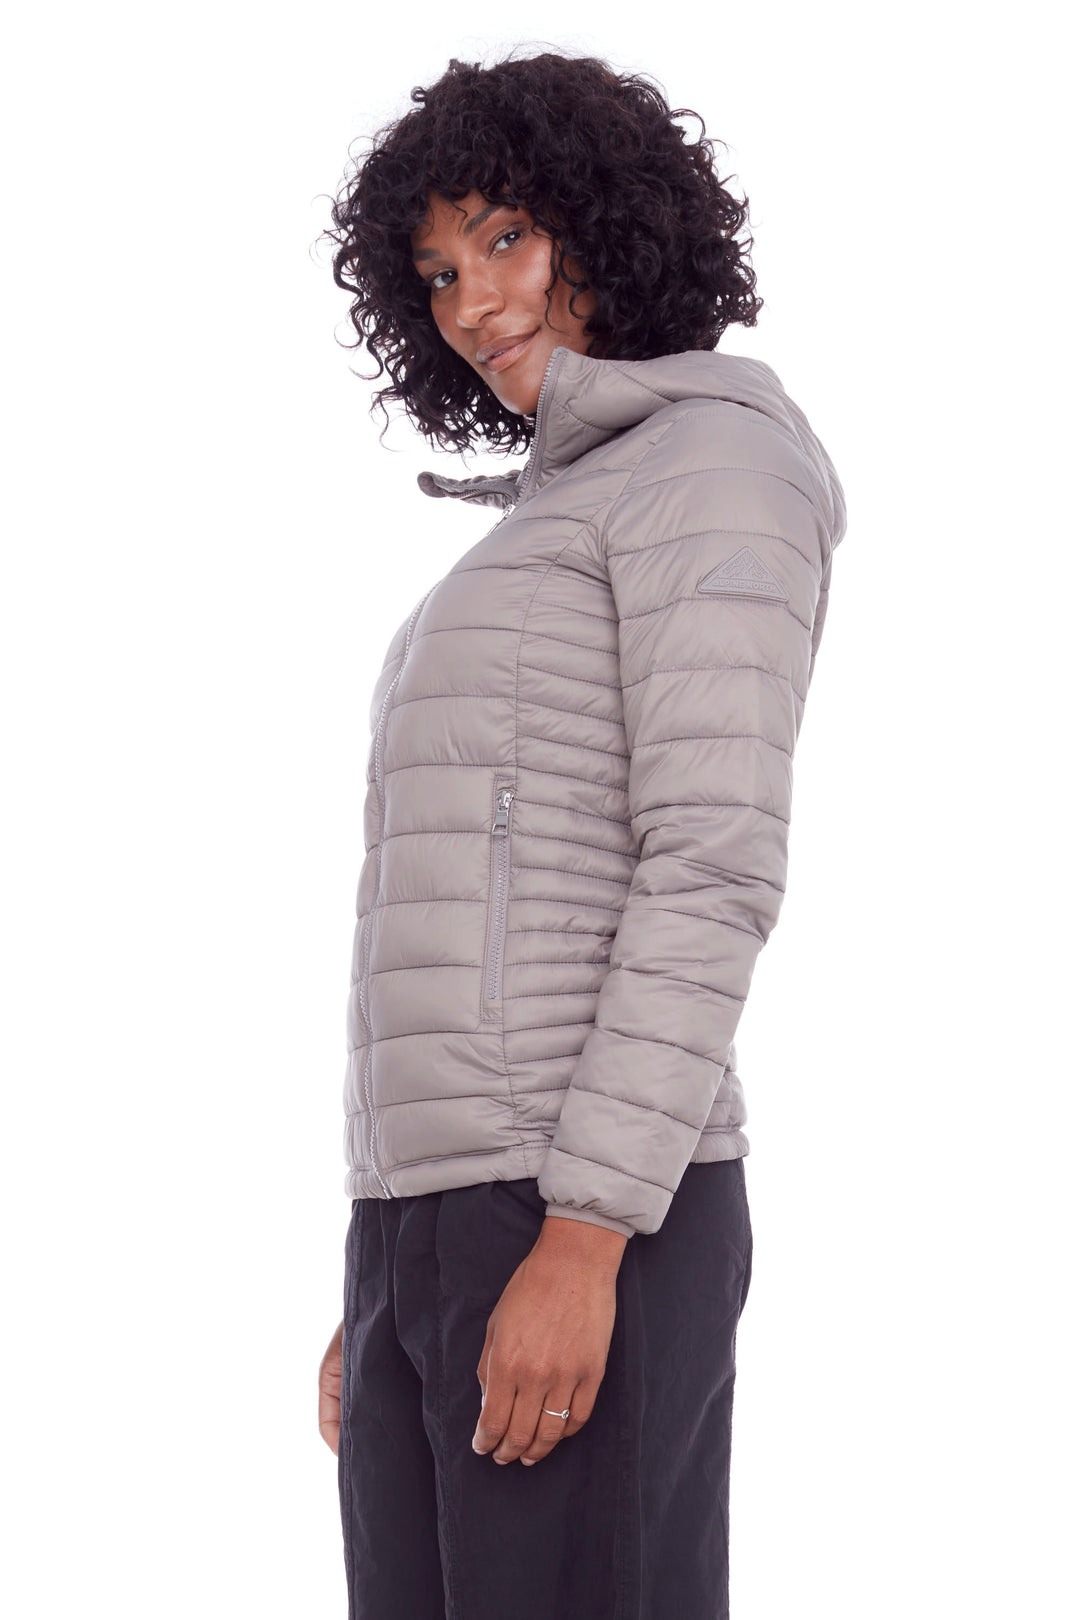 YOHO LADIES' | WOMEN'S VEGAN DOWN (RECYCLED) LIGHTWEIGHT PACKABLE PUFFER, TAUPE